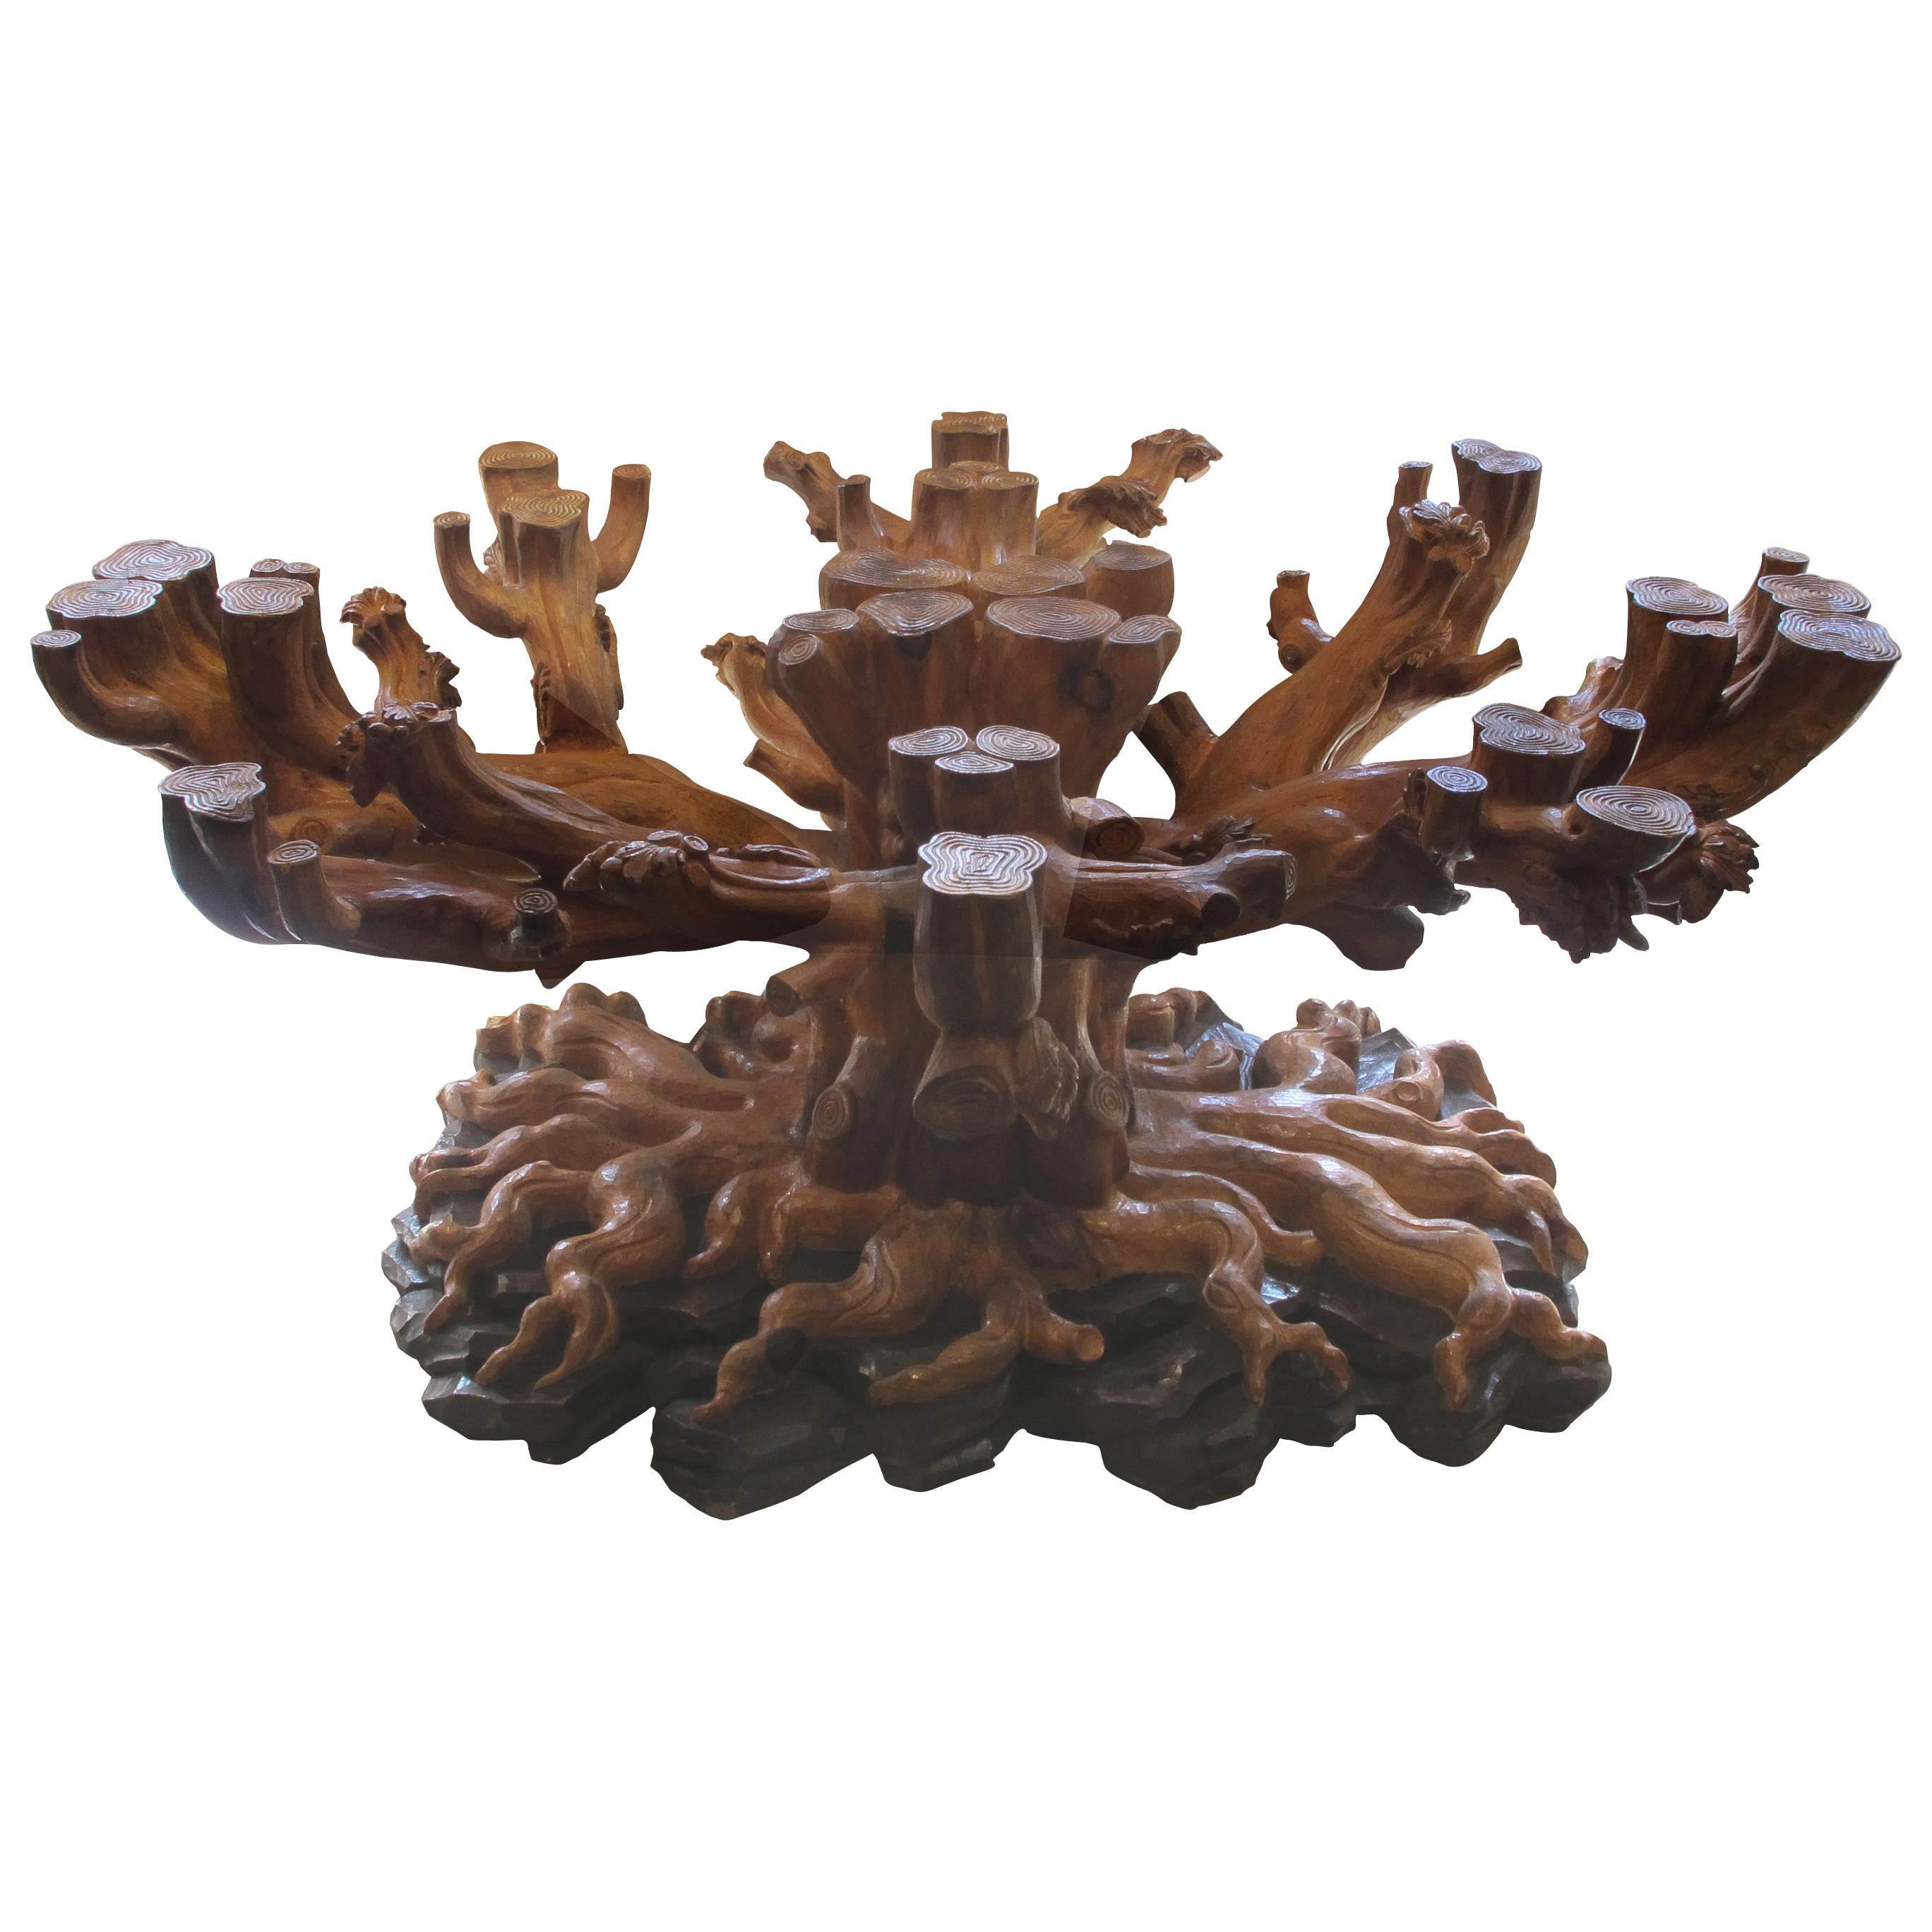 This is a sustainable exceptional dining/centre table base handcrafted from a reclaimed Austrian pine tree by Bartolozzi e Maioli. The table is one of a kind with beautifully carved branches assembled to create a striking sculpture in the shape of